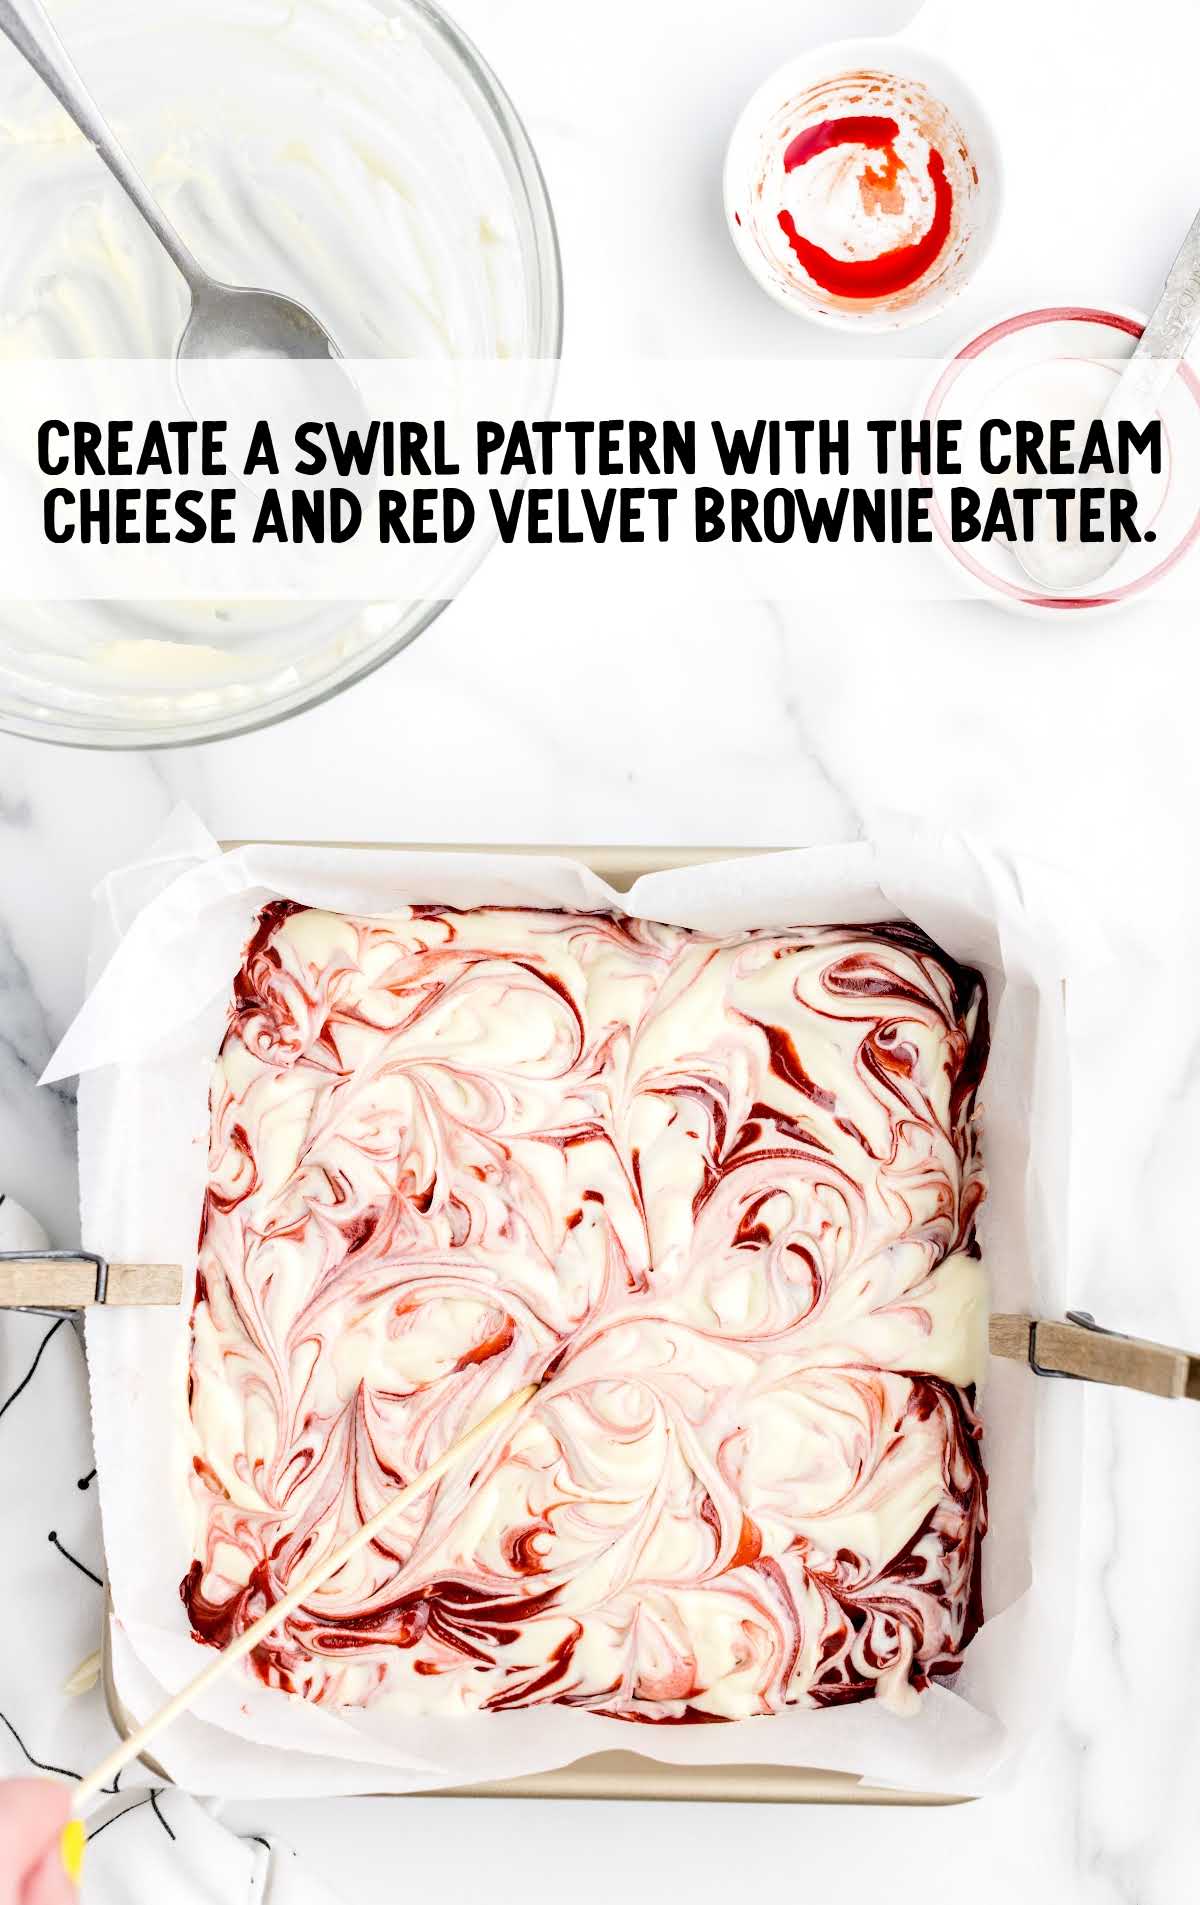 swirl patterns created with the cream cheese and red velvet brownie batter